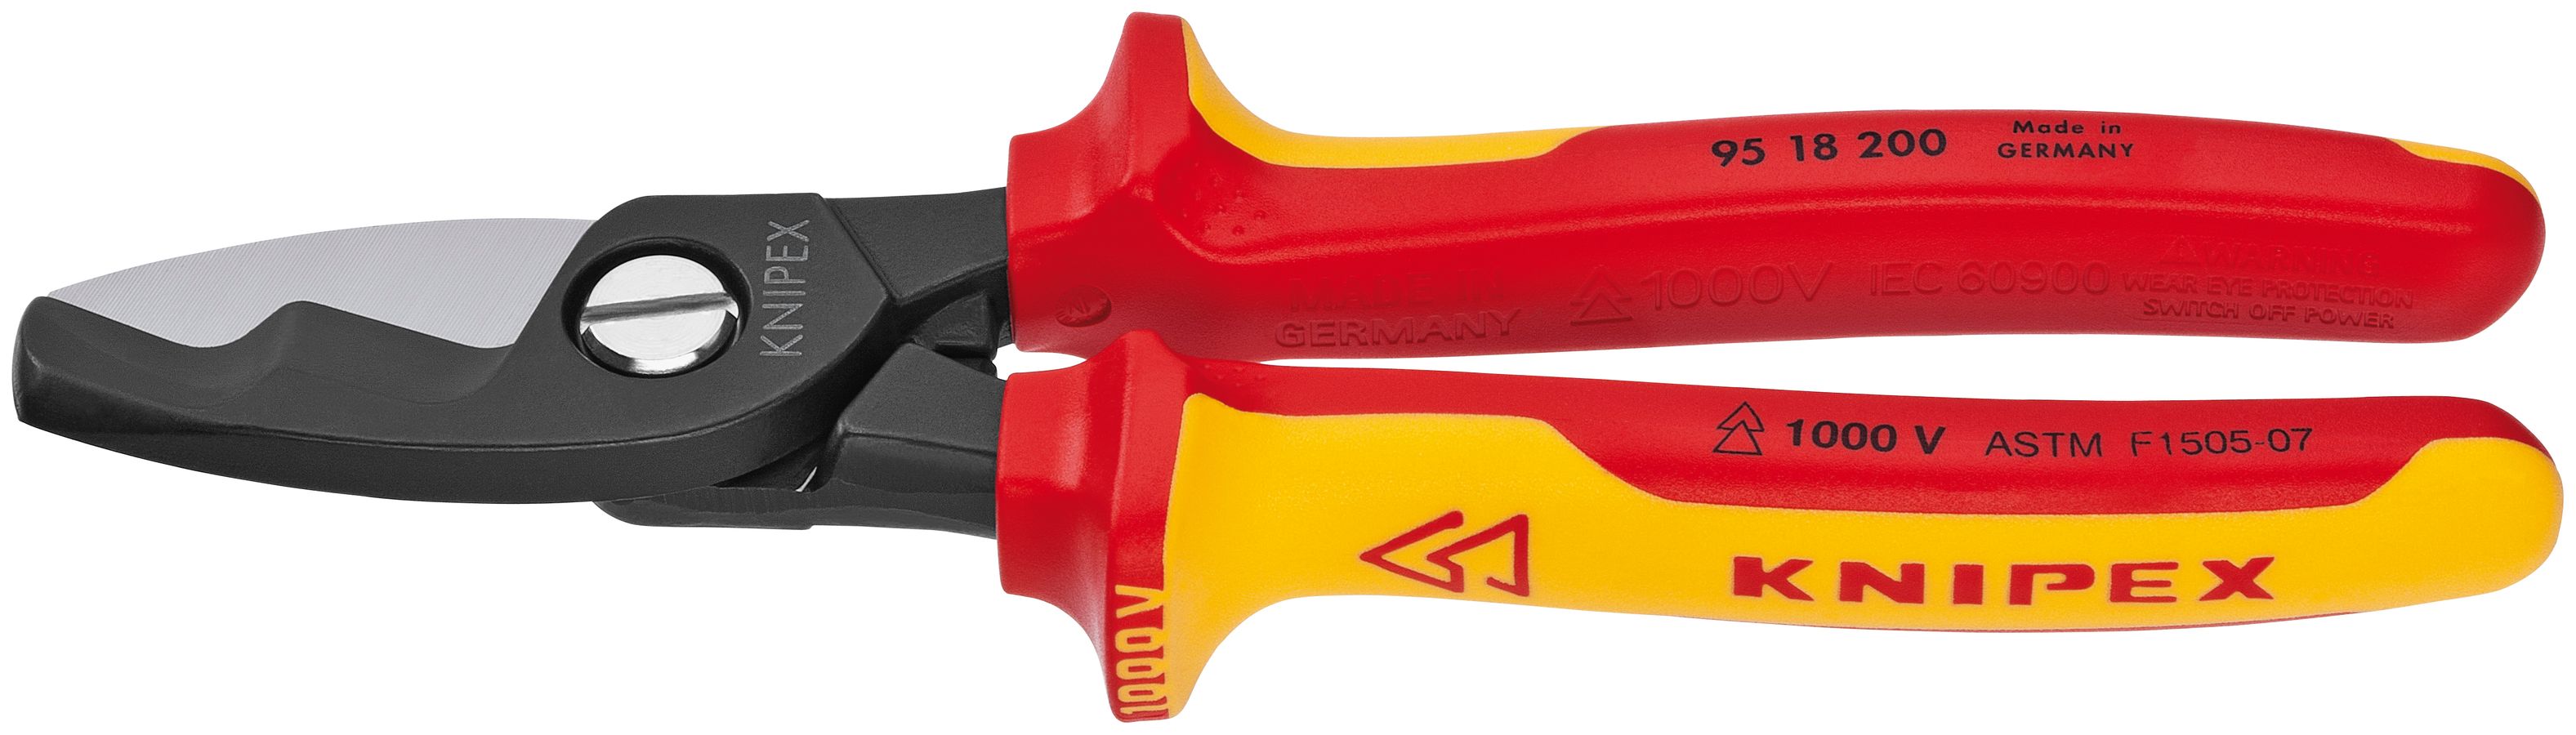 Cable Shears-Twin Cutting Edges-1000V Insulated | KNIPEX Tools